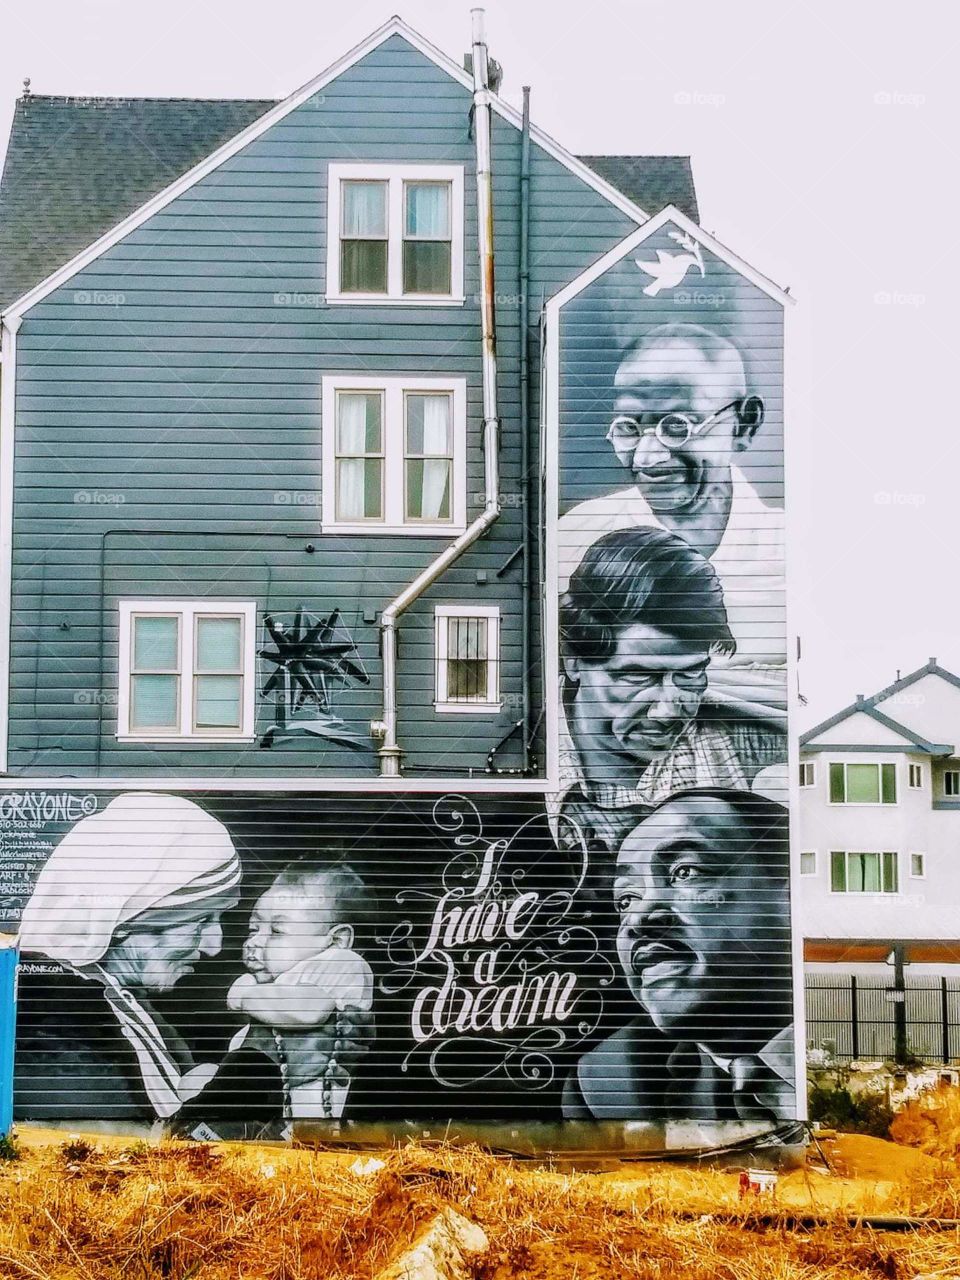 Mural in the Mission.
Mother Theresa, Dr. Martin Luther King, Jr., Cesar Chavez, Gandhi